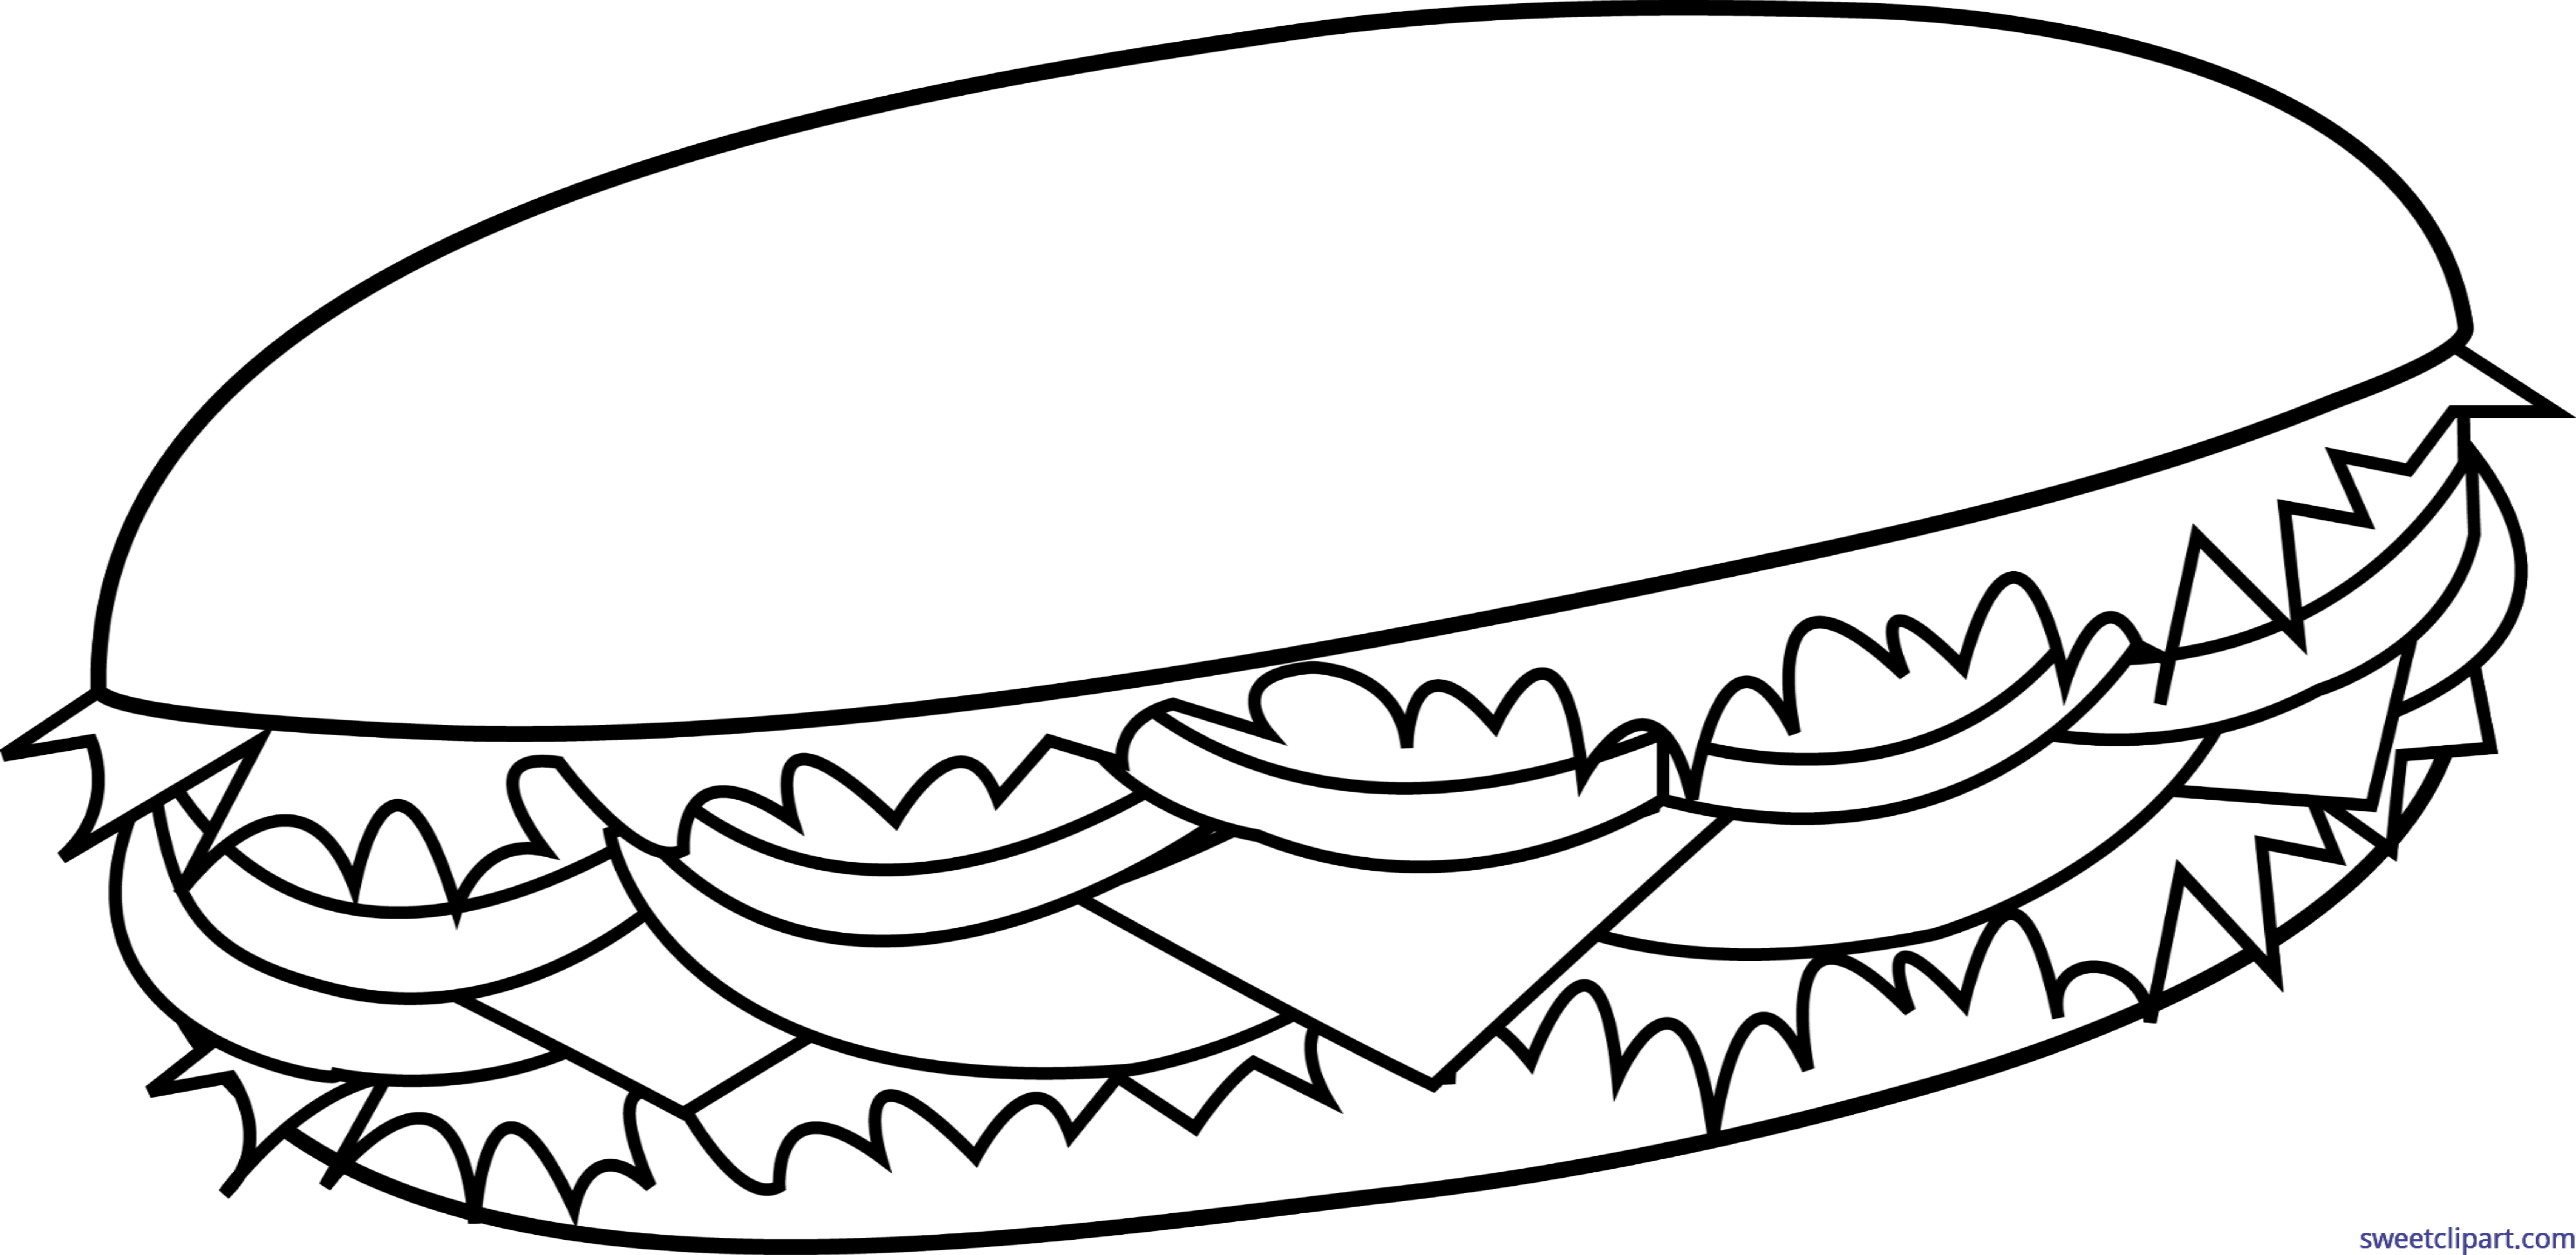 cheese sandwich clipart black and white